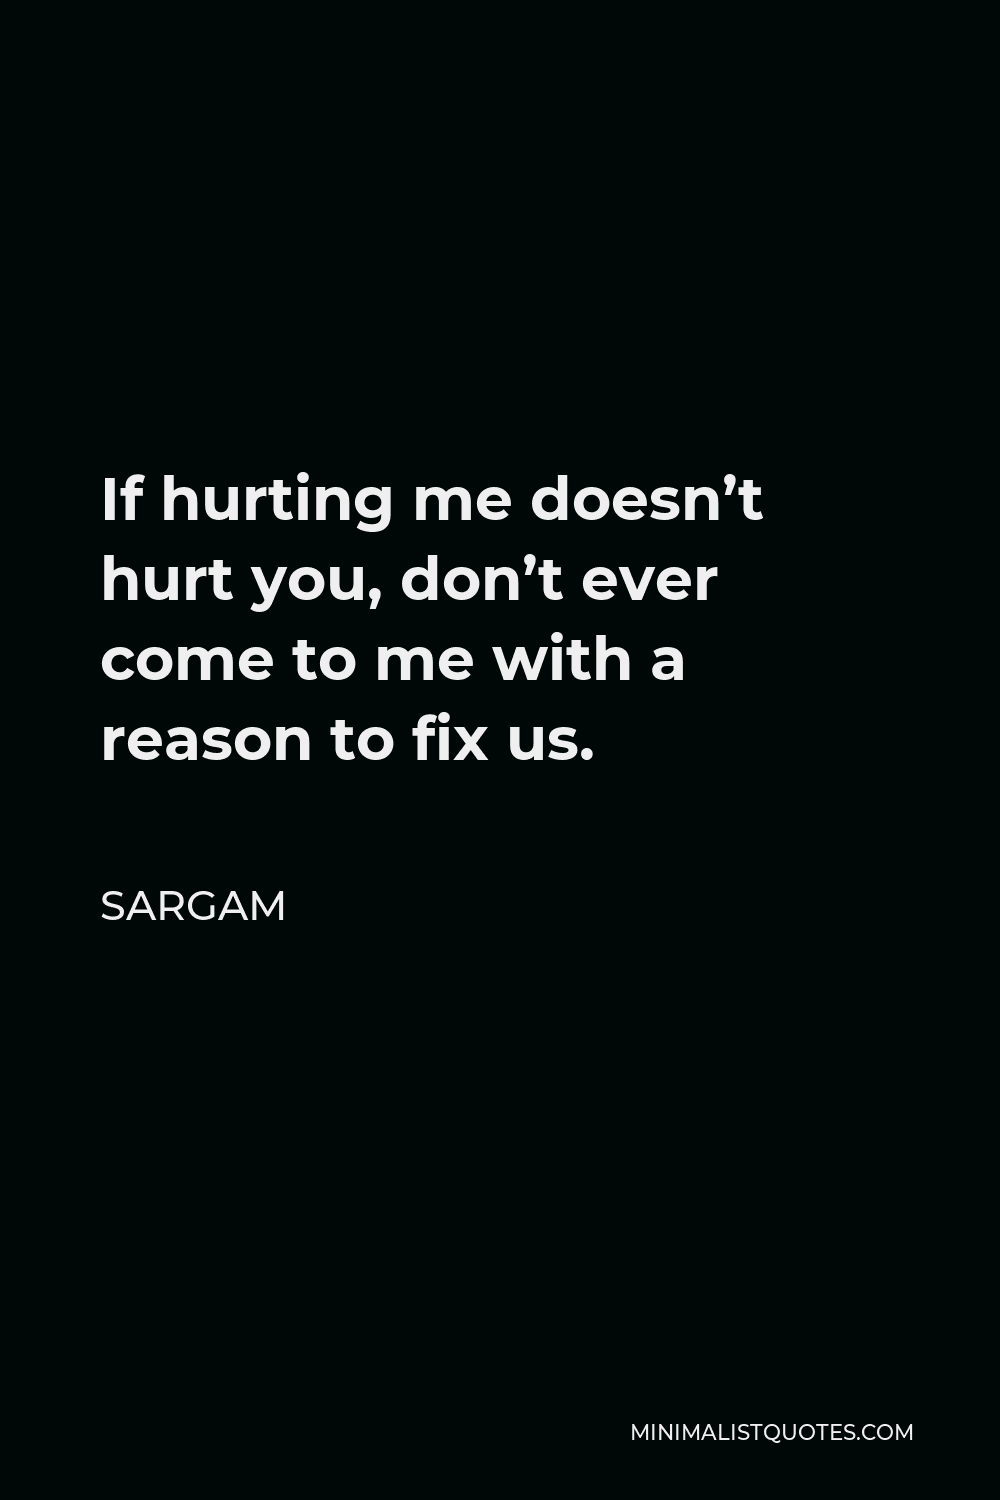 Sargam Quote - If hurting me doesn’t hurt you, don’t ever come to me with a reason to fix us.